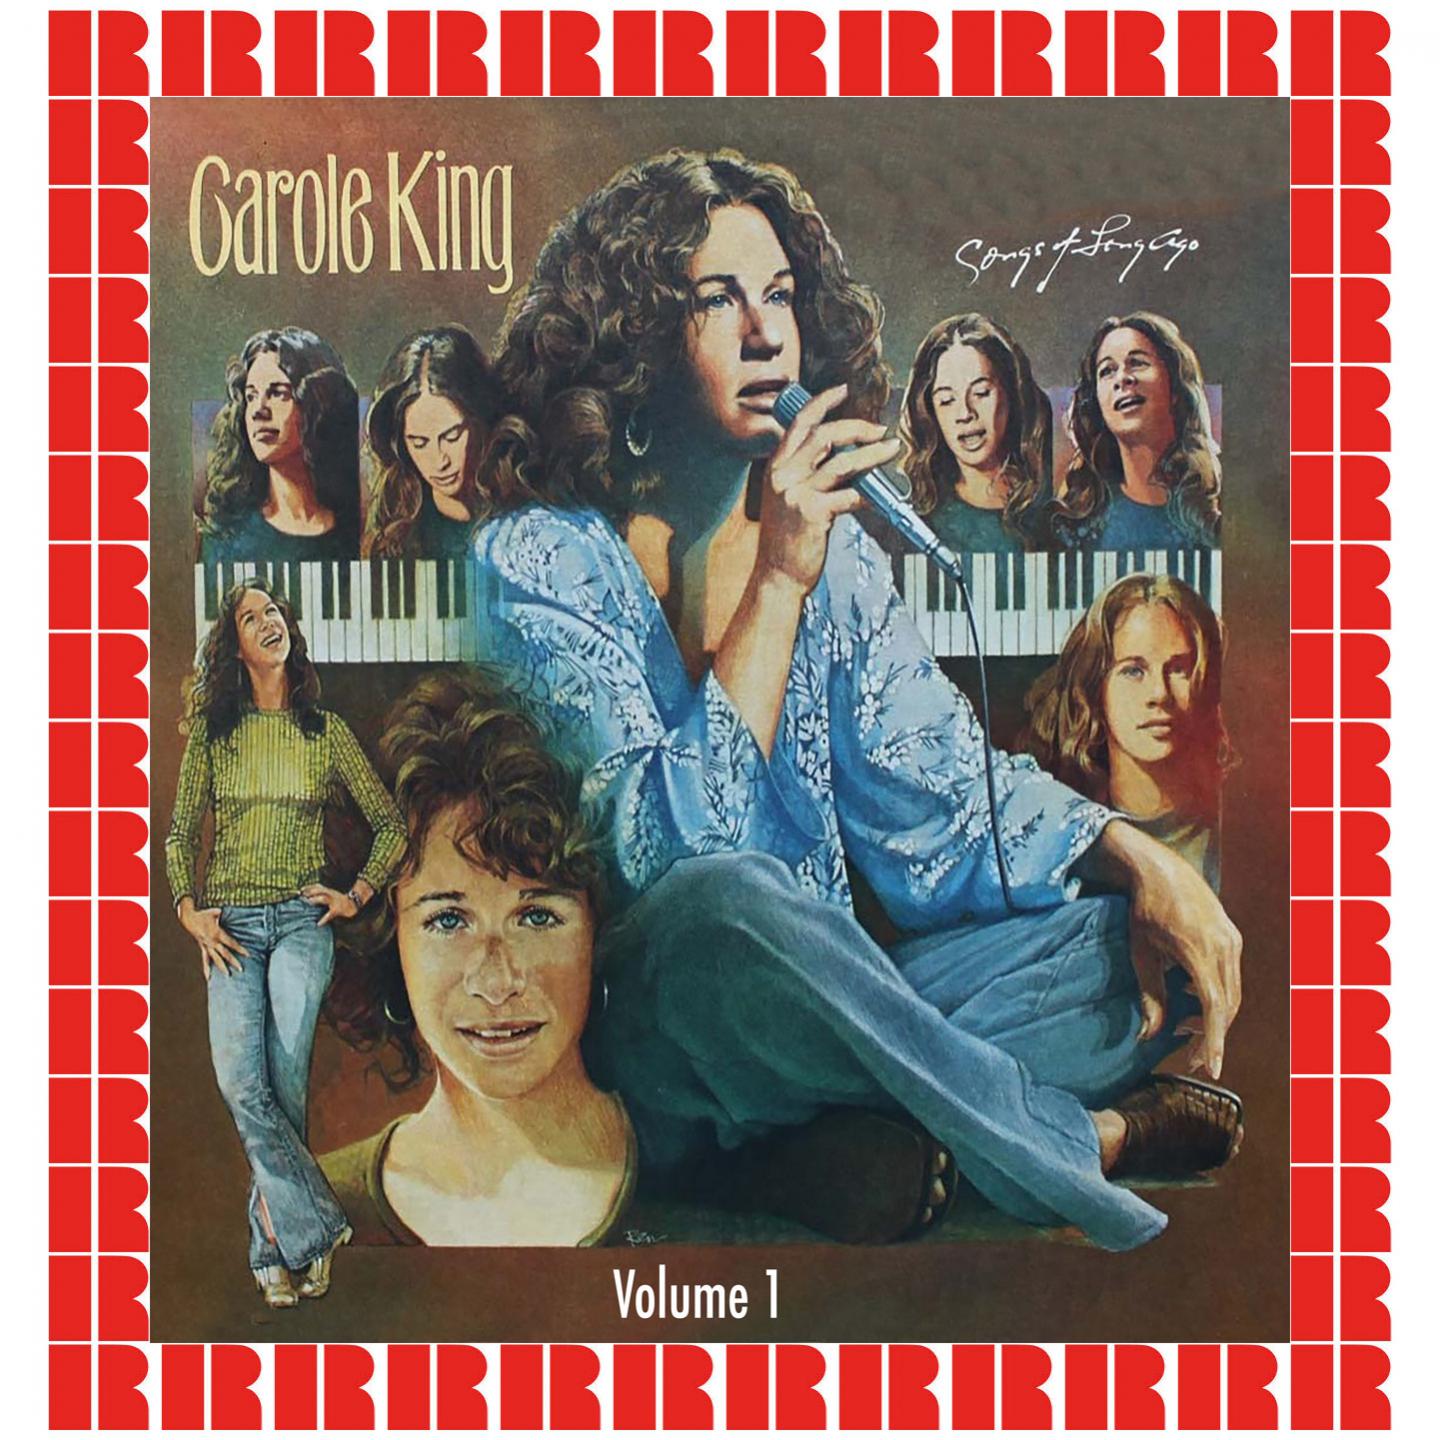 The Songs Of Carole King, Vol. 1